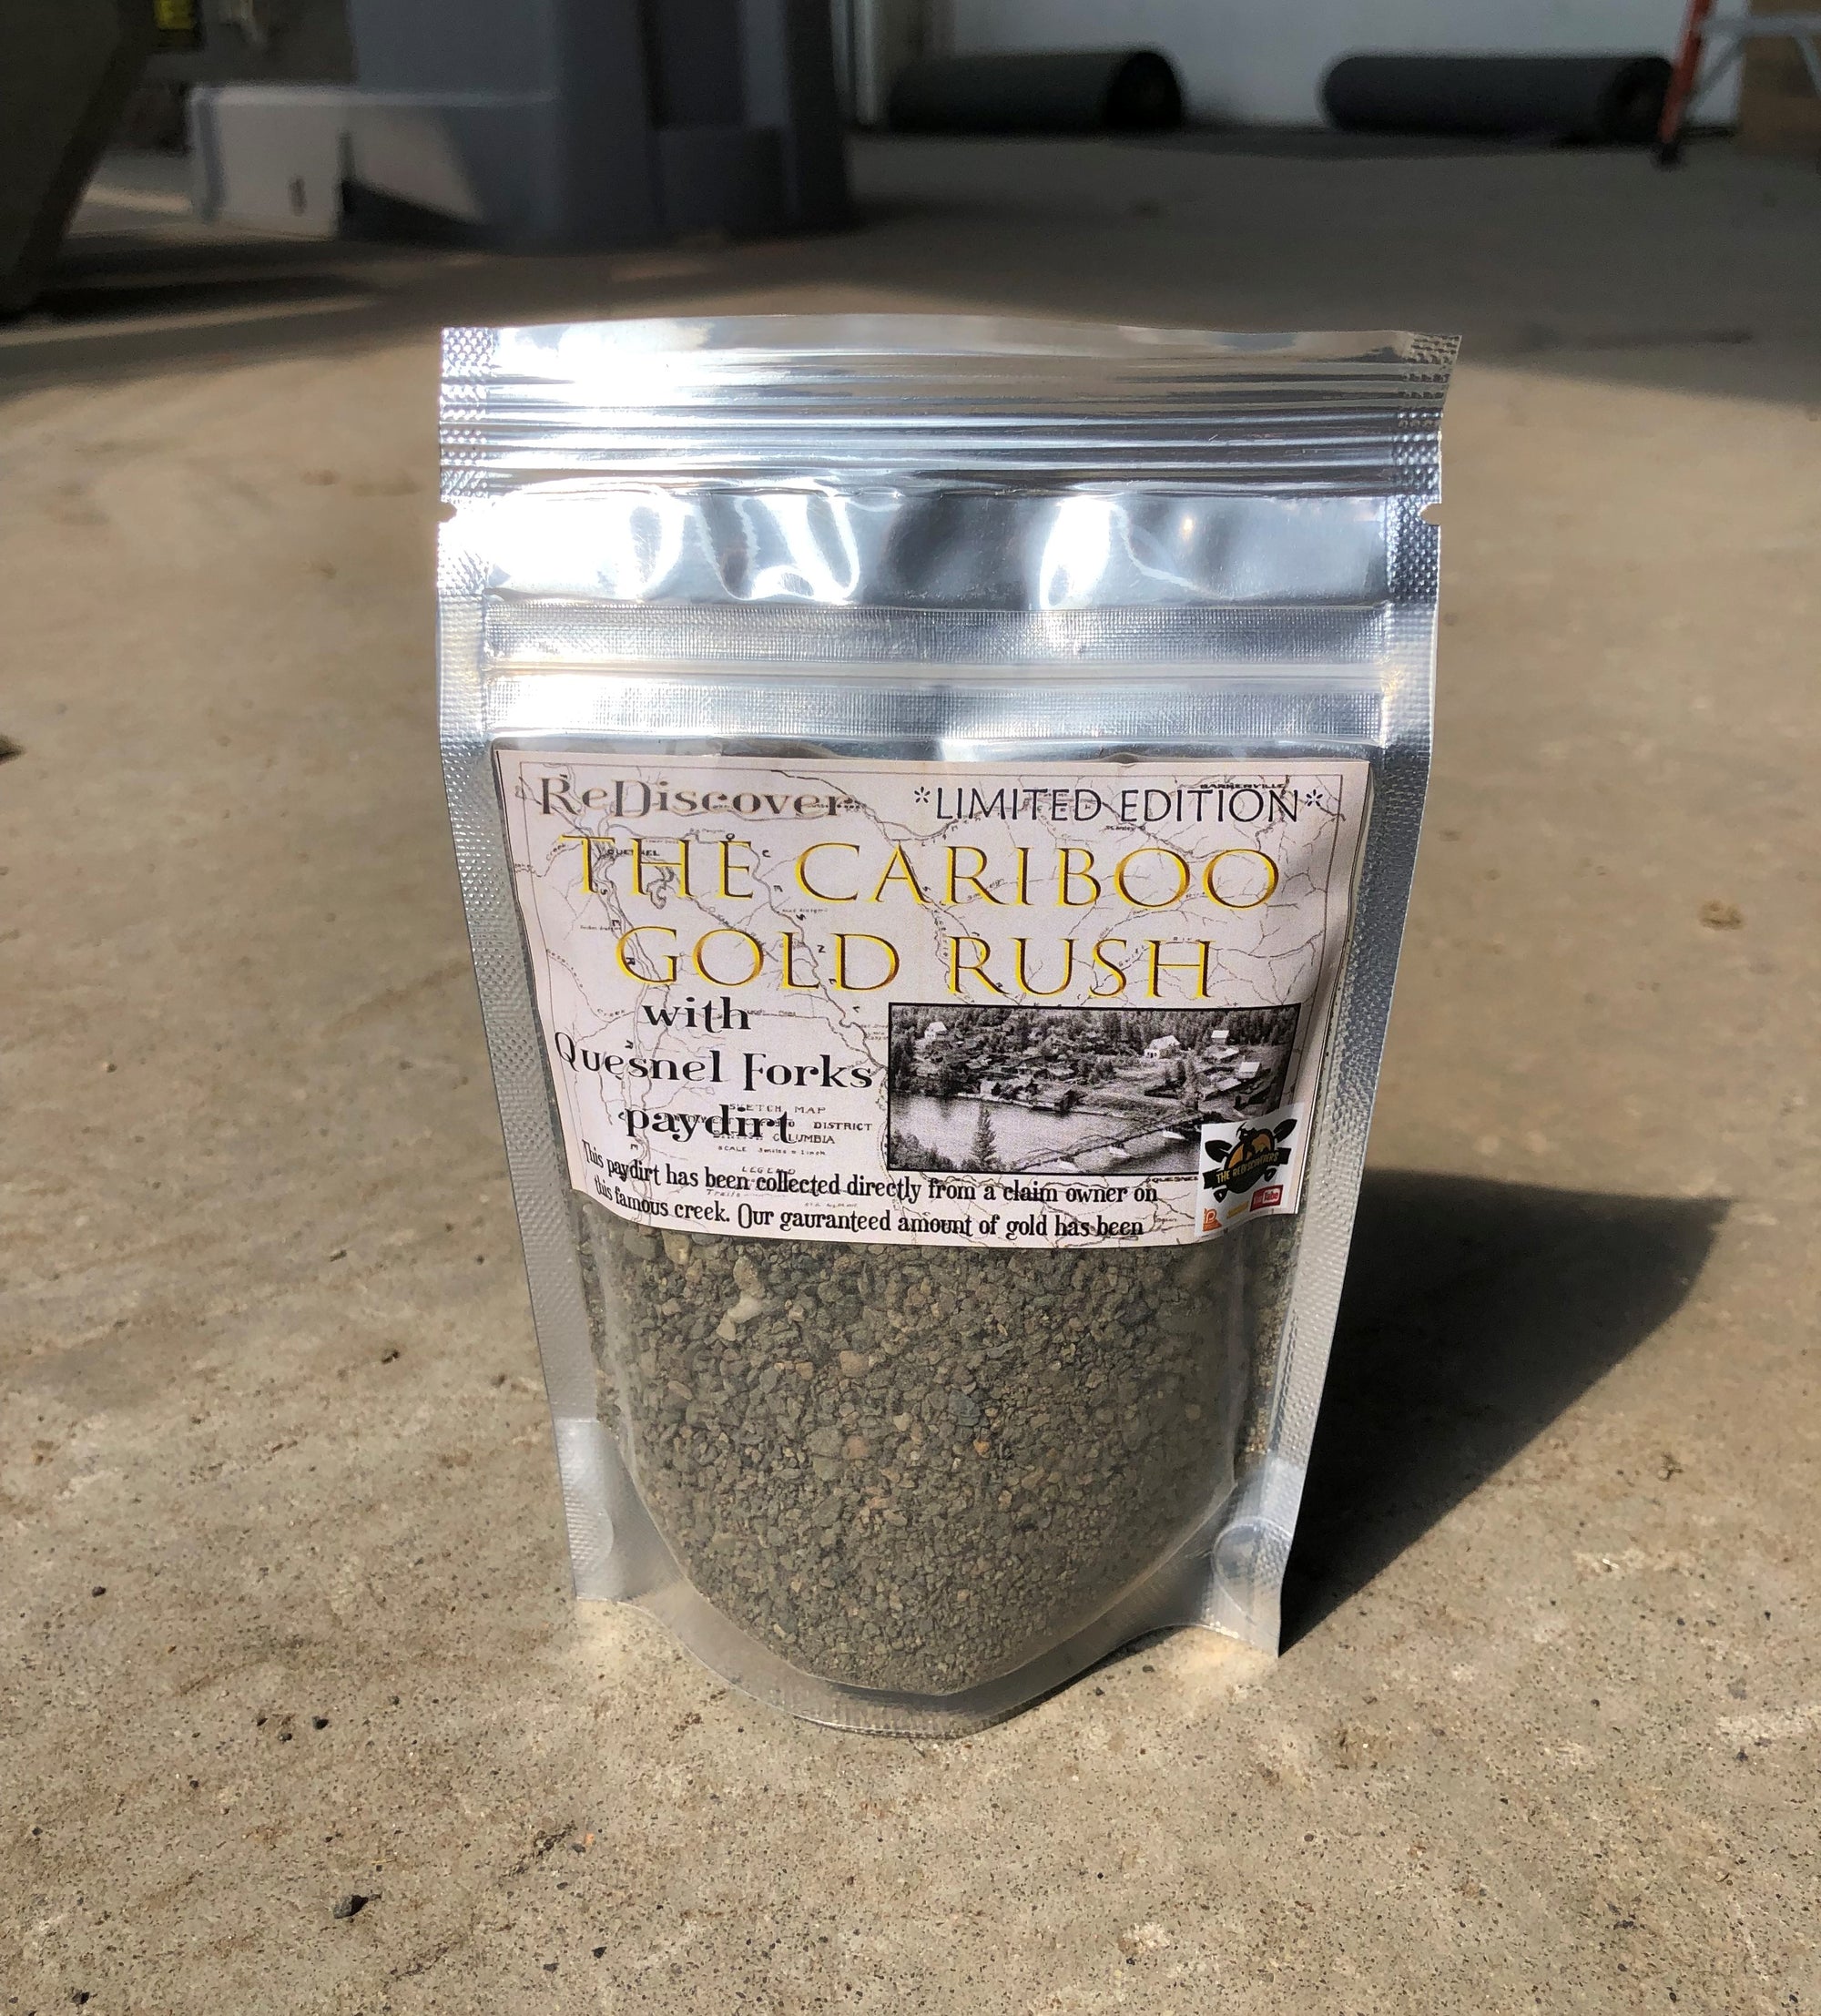 The ReDiscoverers - ReDiscover The Cariboo Gold Rush - Quesnel Forks Paydirt 1/2lb Bag